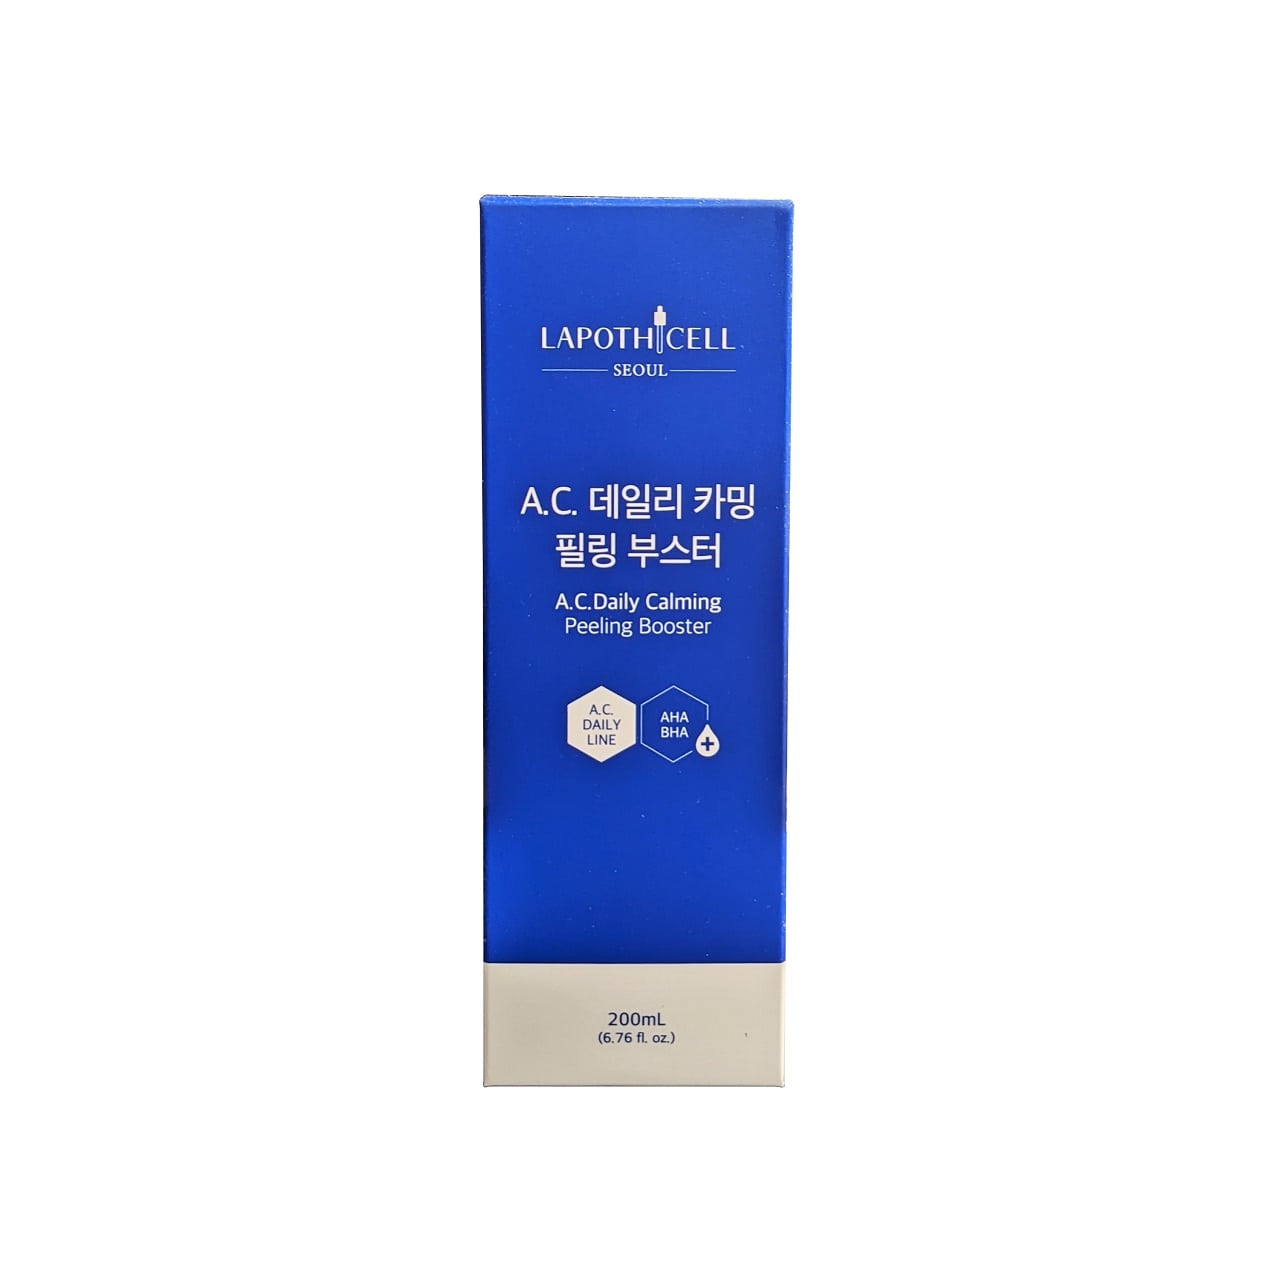 Product label for Lapothicell A.C. Daily Calming Peeling Booster (200 mL)